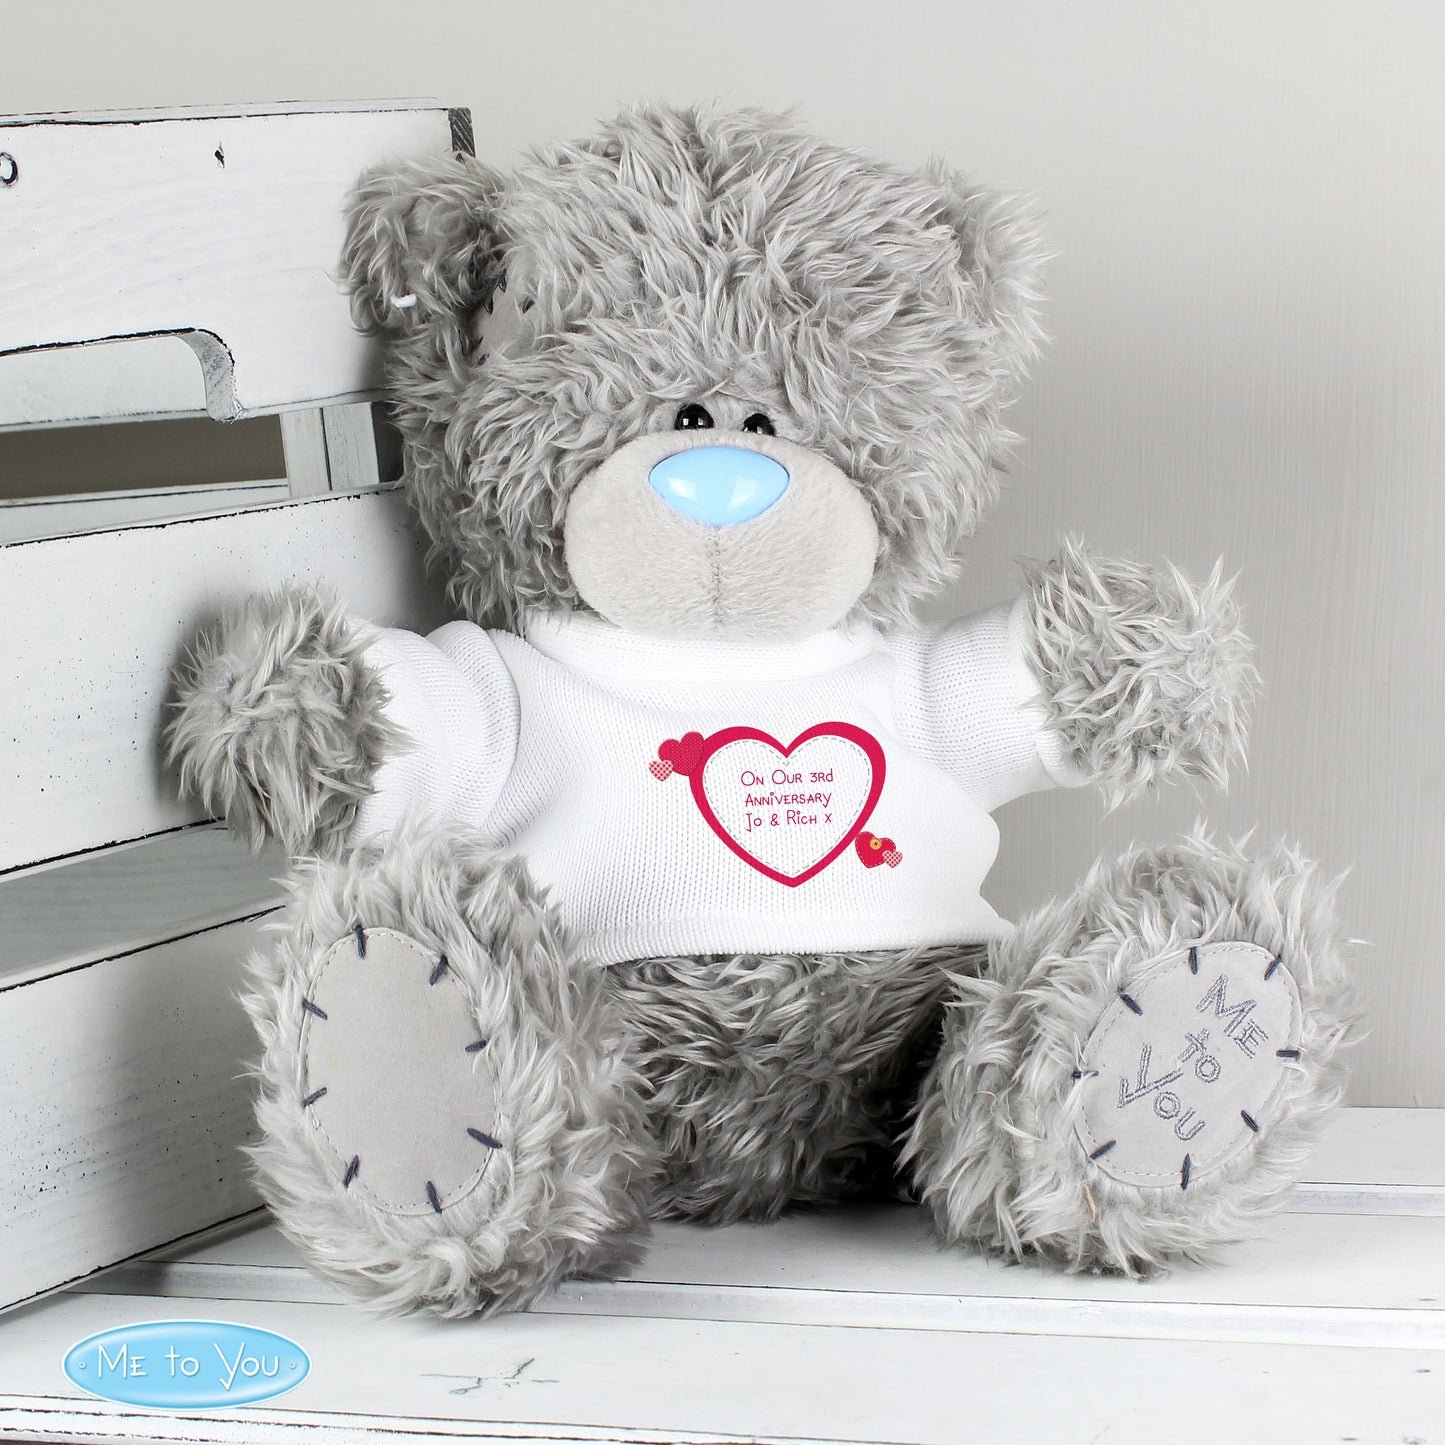 Personalised Me to You Bear Hearts Teddy